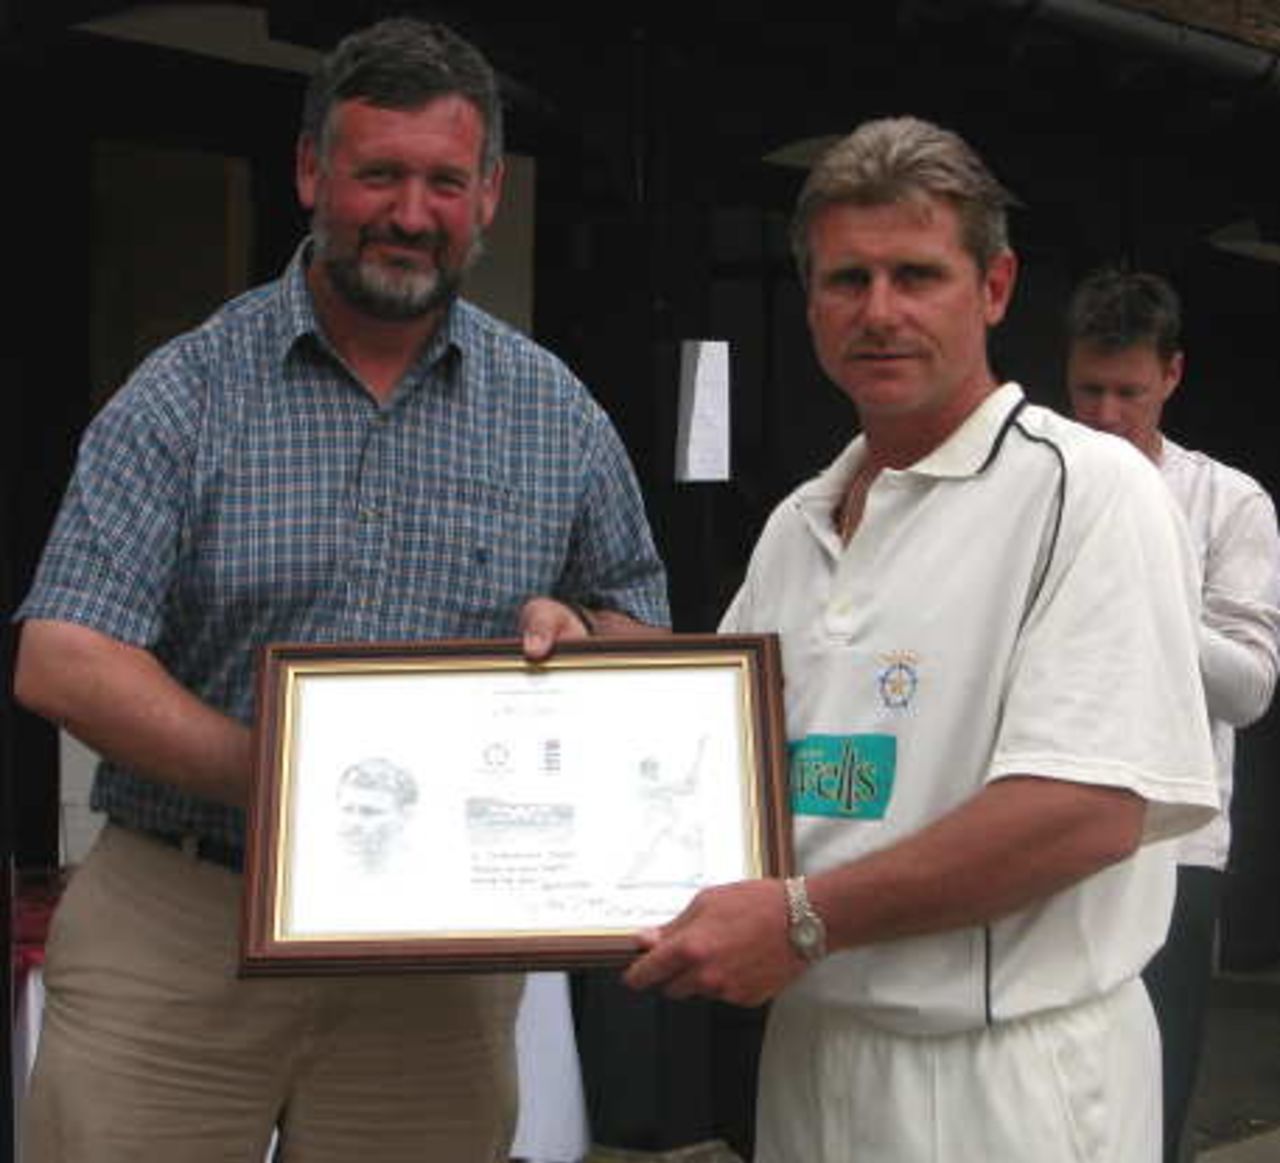 Robin Smith presents Bob Noble Director of Sports and scorer at Charterhouse School